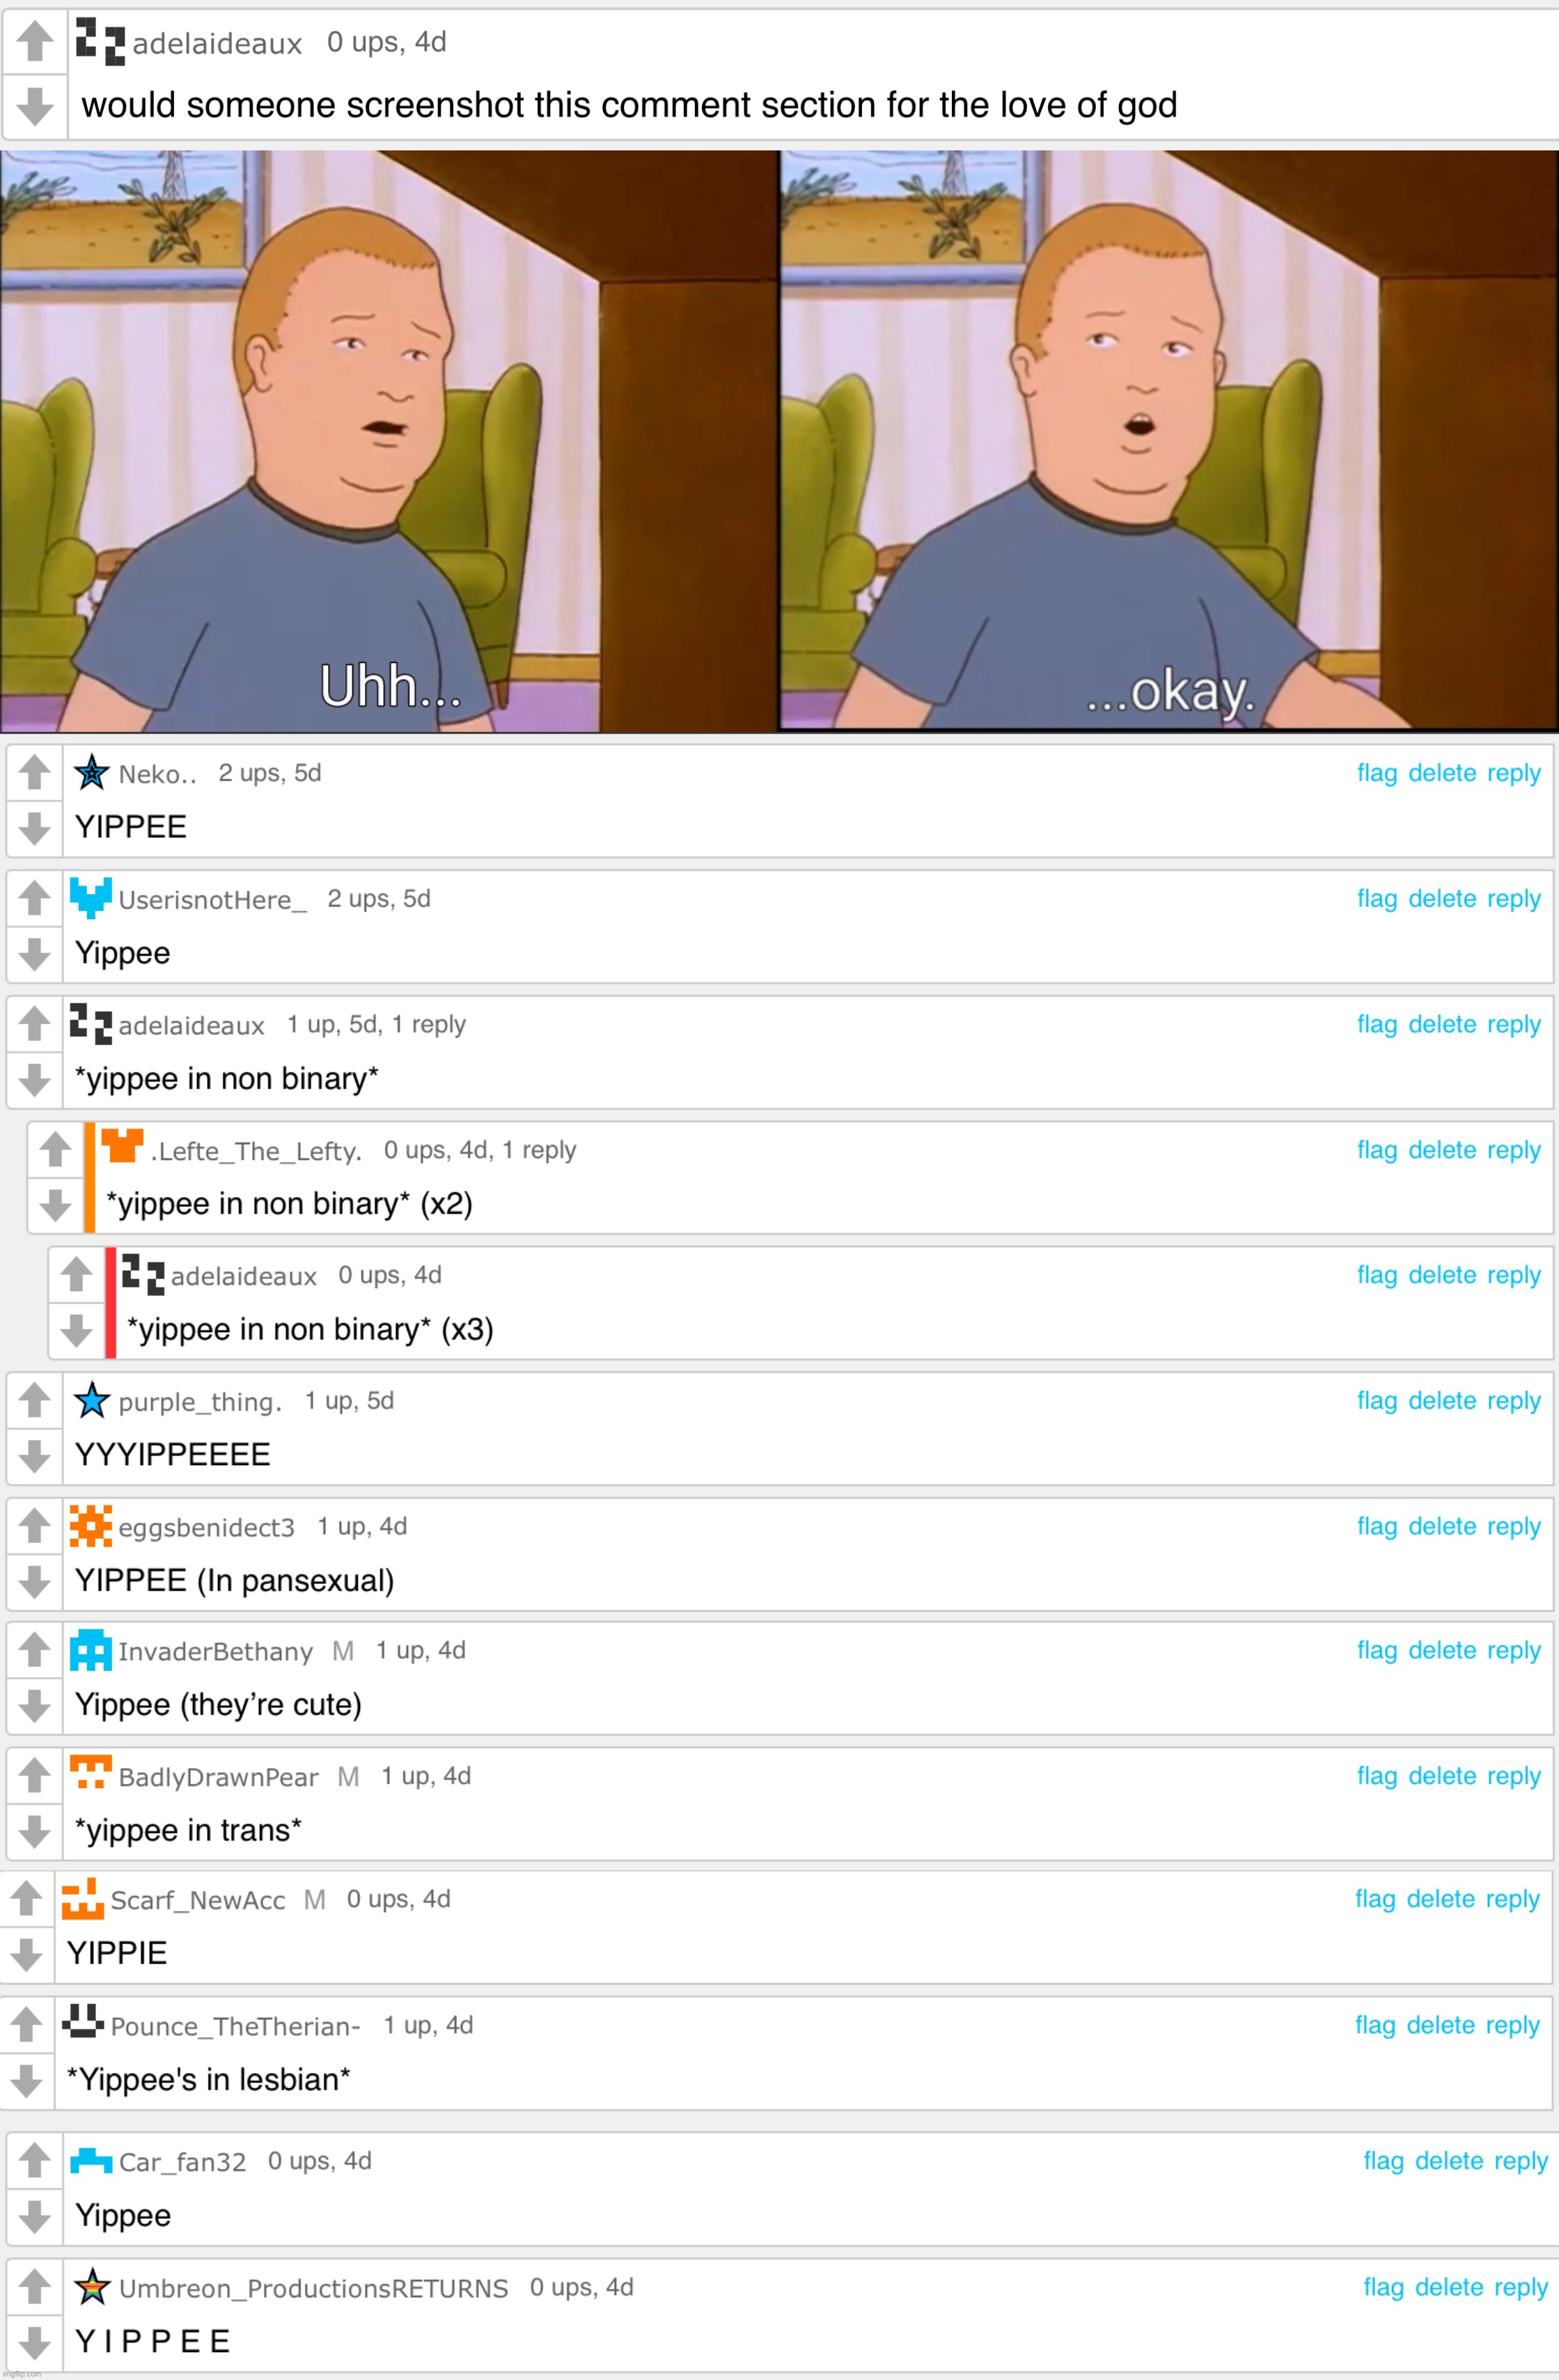 Yippee | image tagged in yippee,autism creature,lgbtq,comments,comment section,king of the hill | made w/ Imgflip meme maker